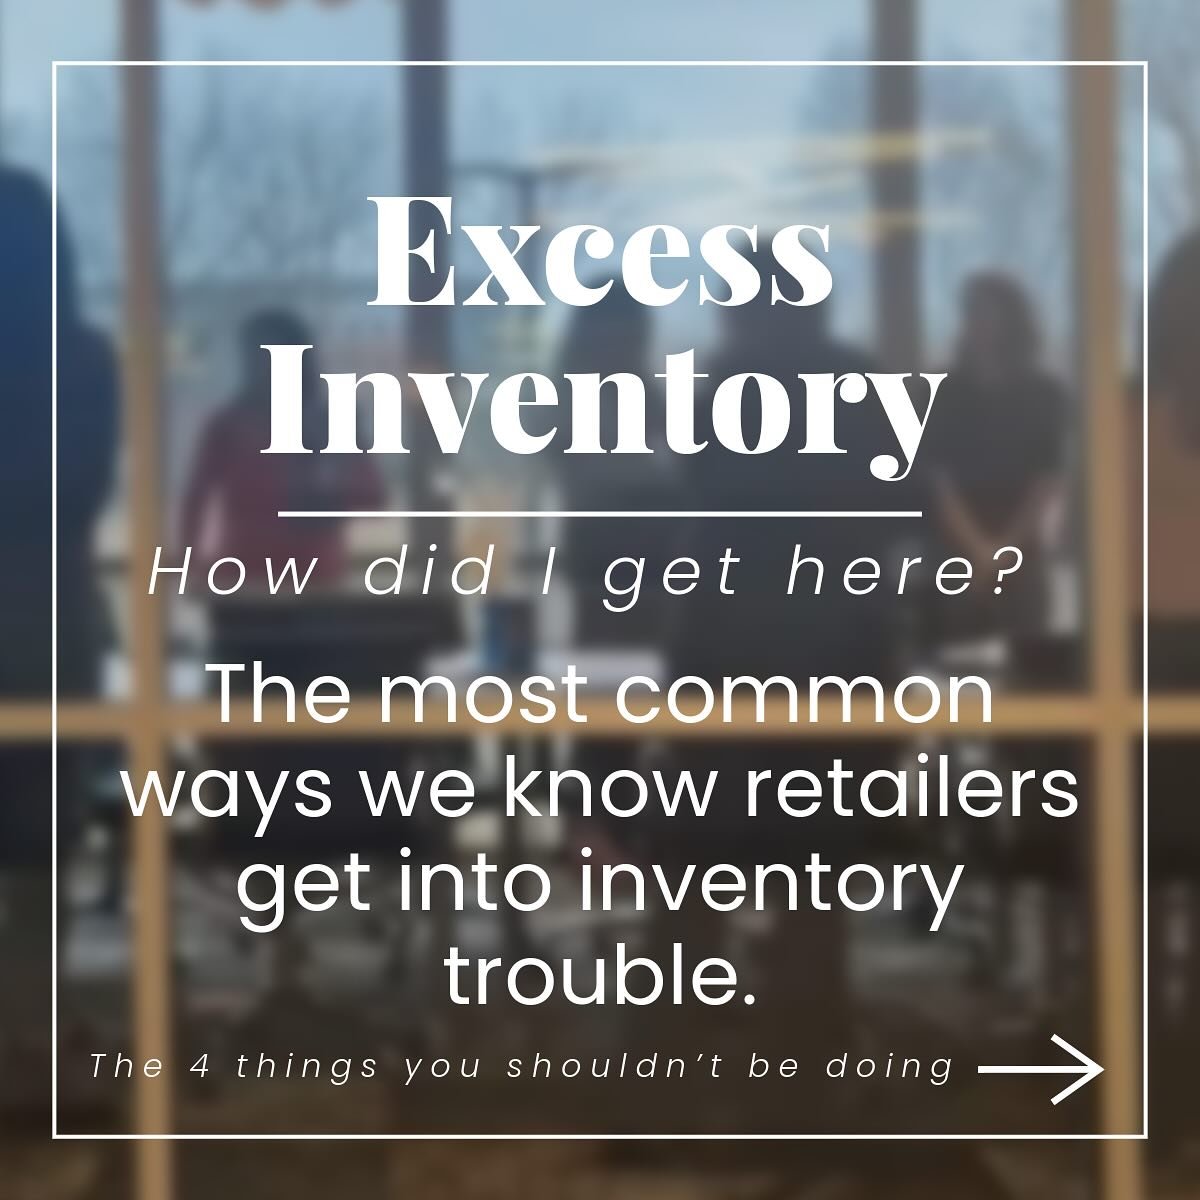 Oh no, &ldquo;we made too much.&rdquo; 😬 it happens to the savviest of retailers and #prouductbased businesses. ➡️Swipe through this and see if you&rsquo;re making any of these common missteps. 

While excess inventory can sometimes be attributed to